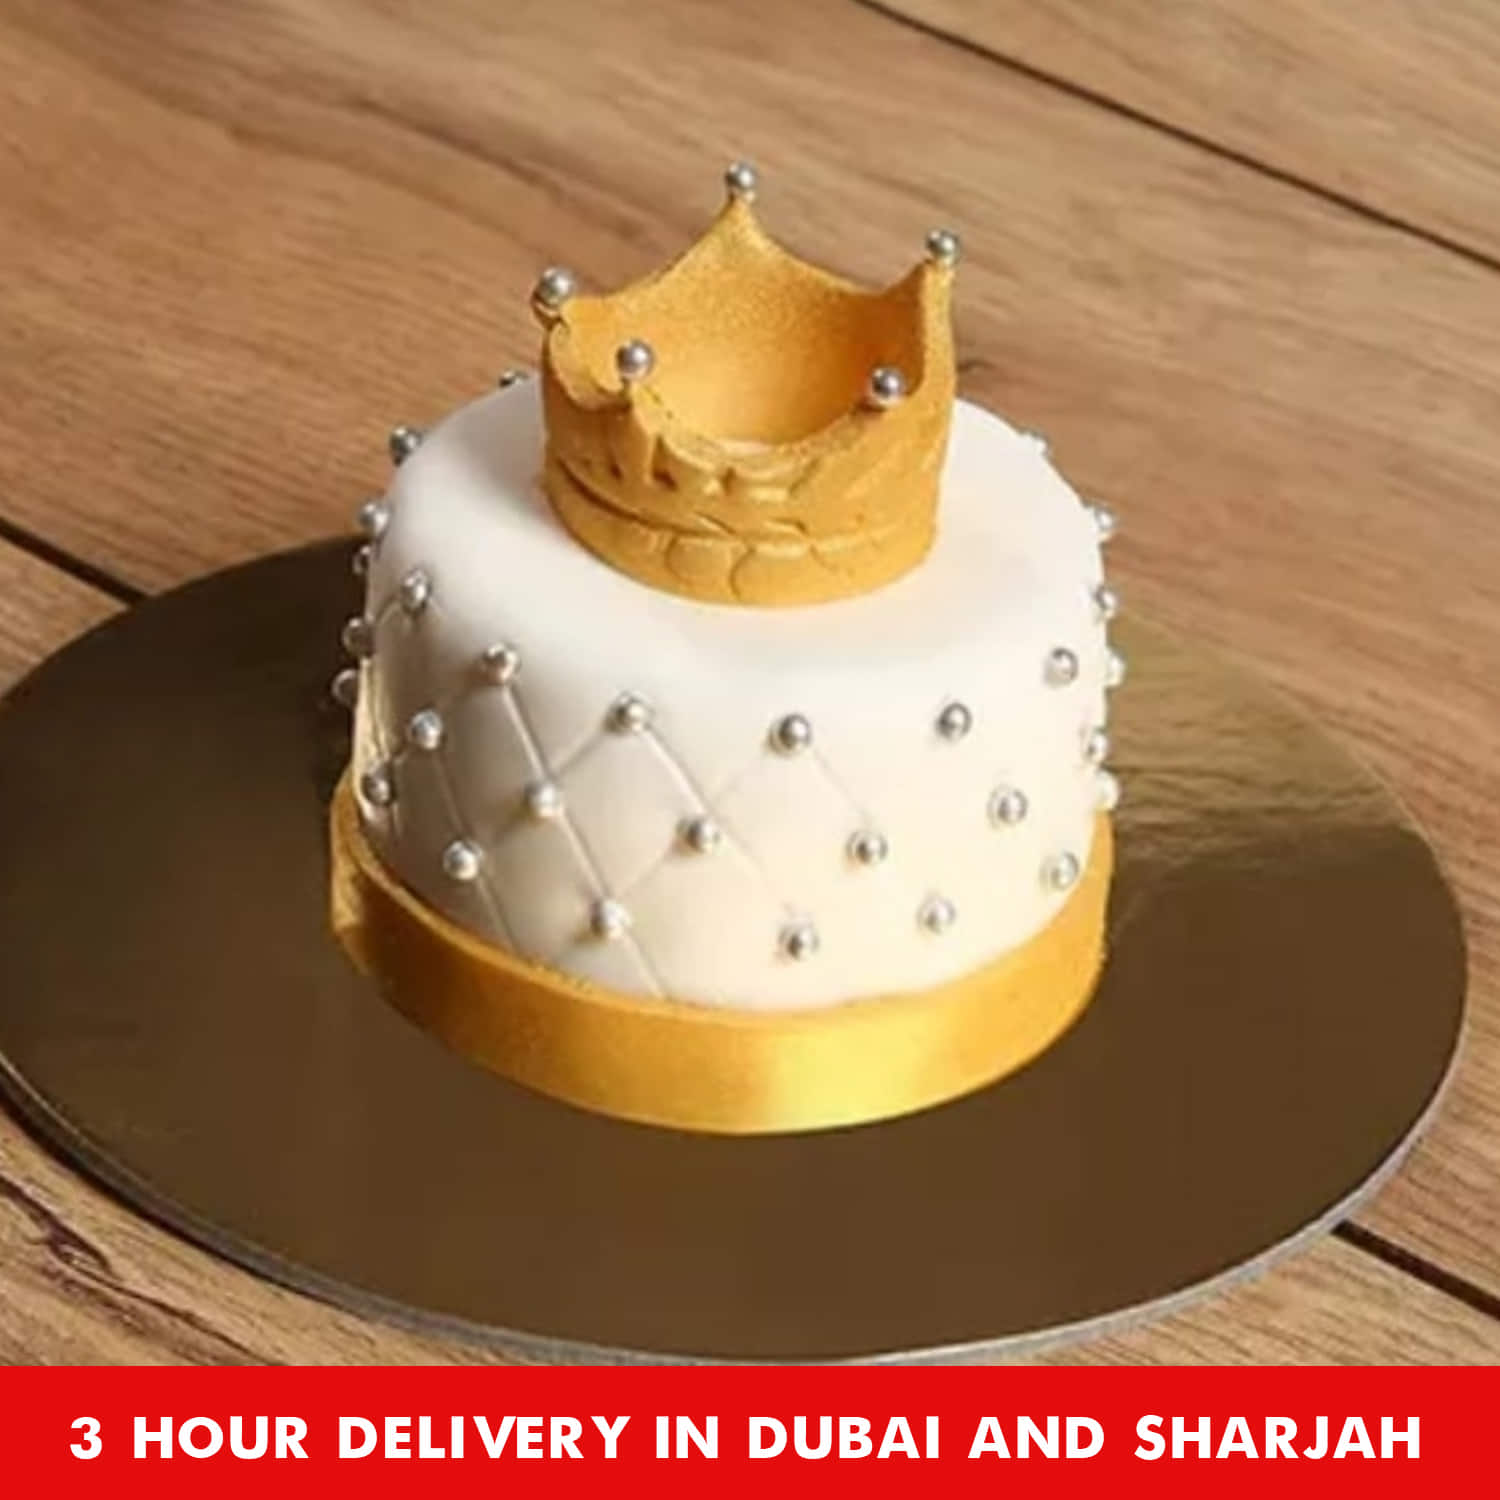 Happiness 101; joy in every bite - For all the King's of their Castles out  there 👑 This crown cake is surely fit for a king. 🤴 ~Strawberry Shortcake  inside an intricately